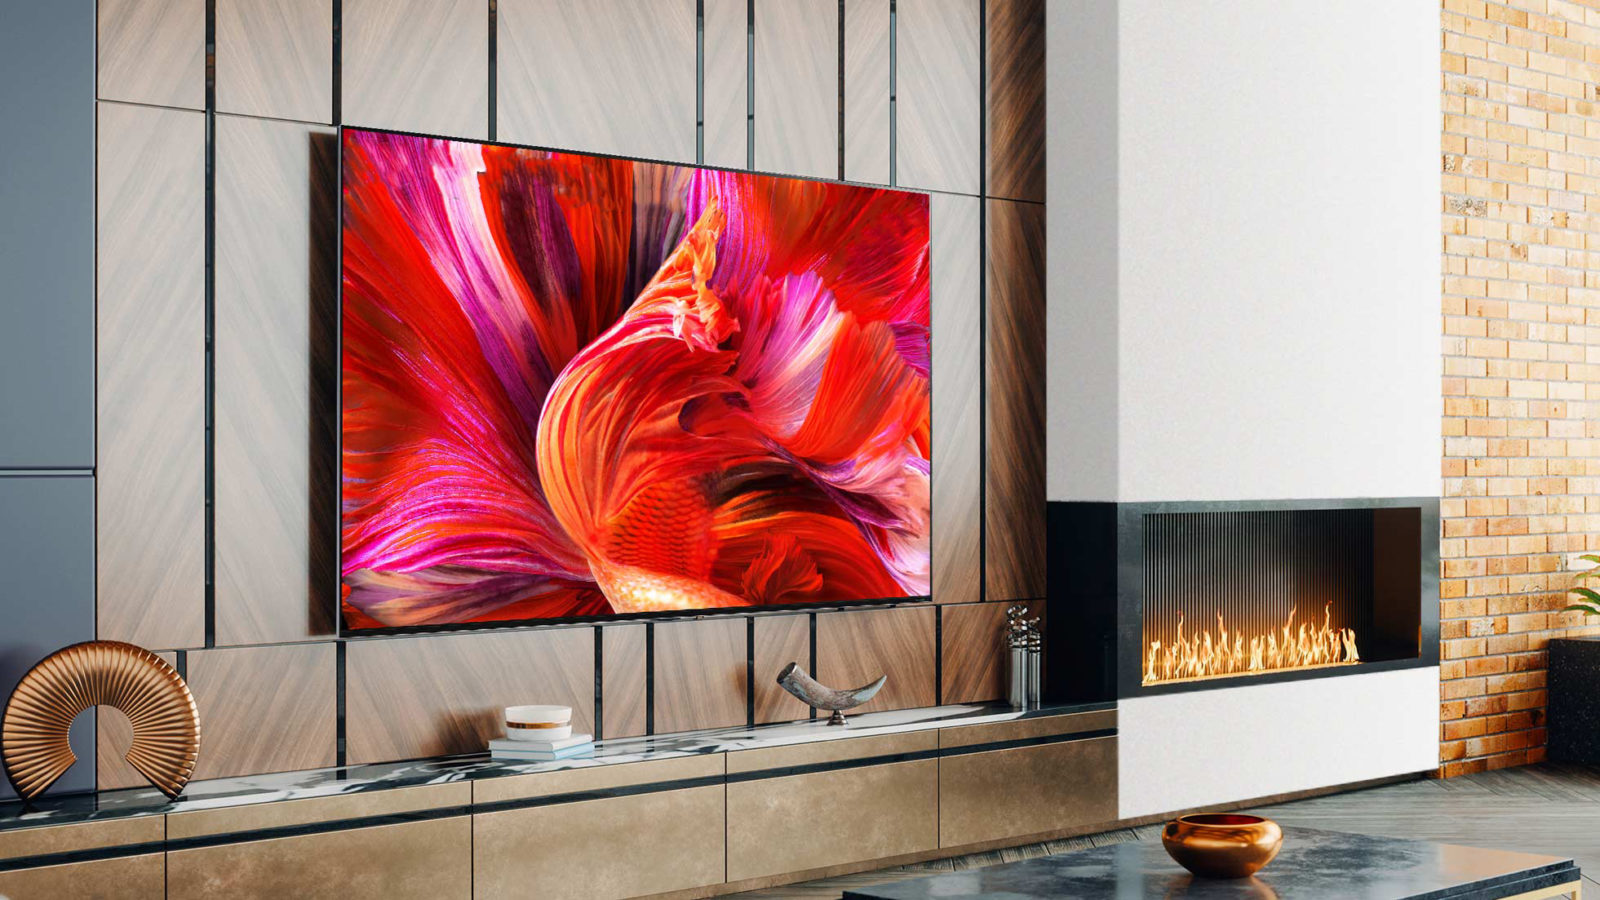 5 reasons why your next televisions should gbe an LG